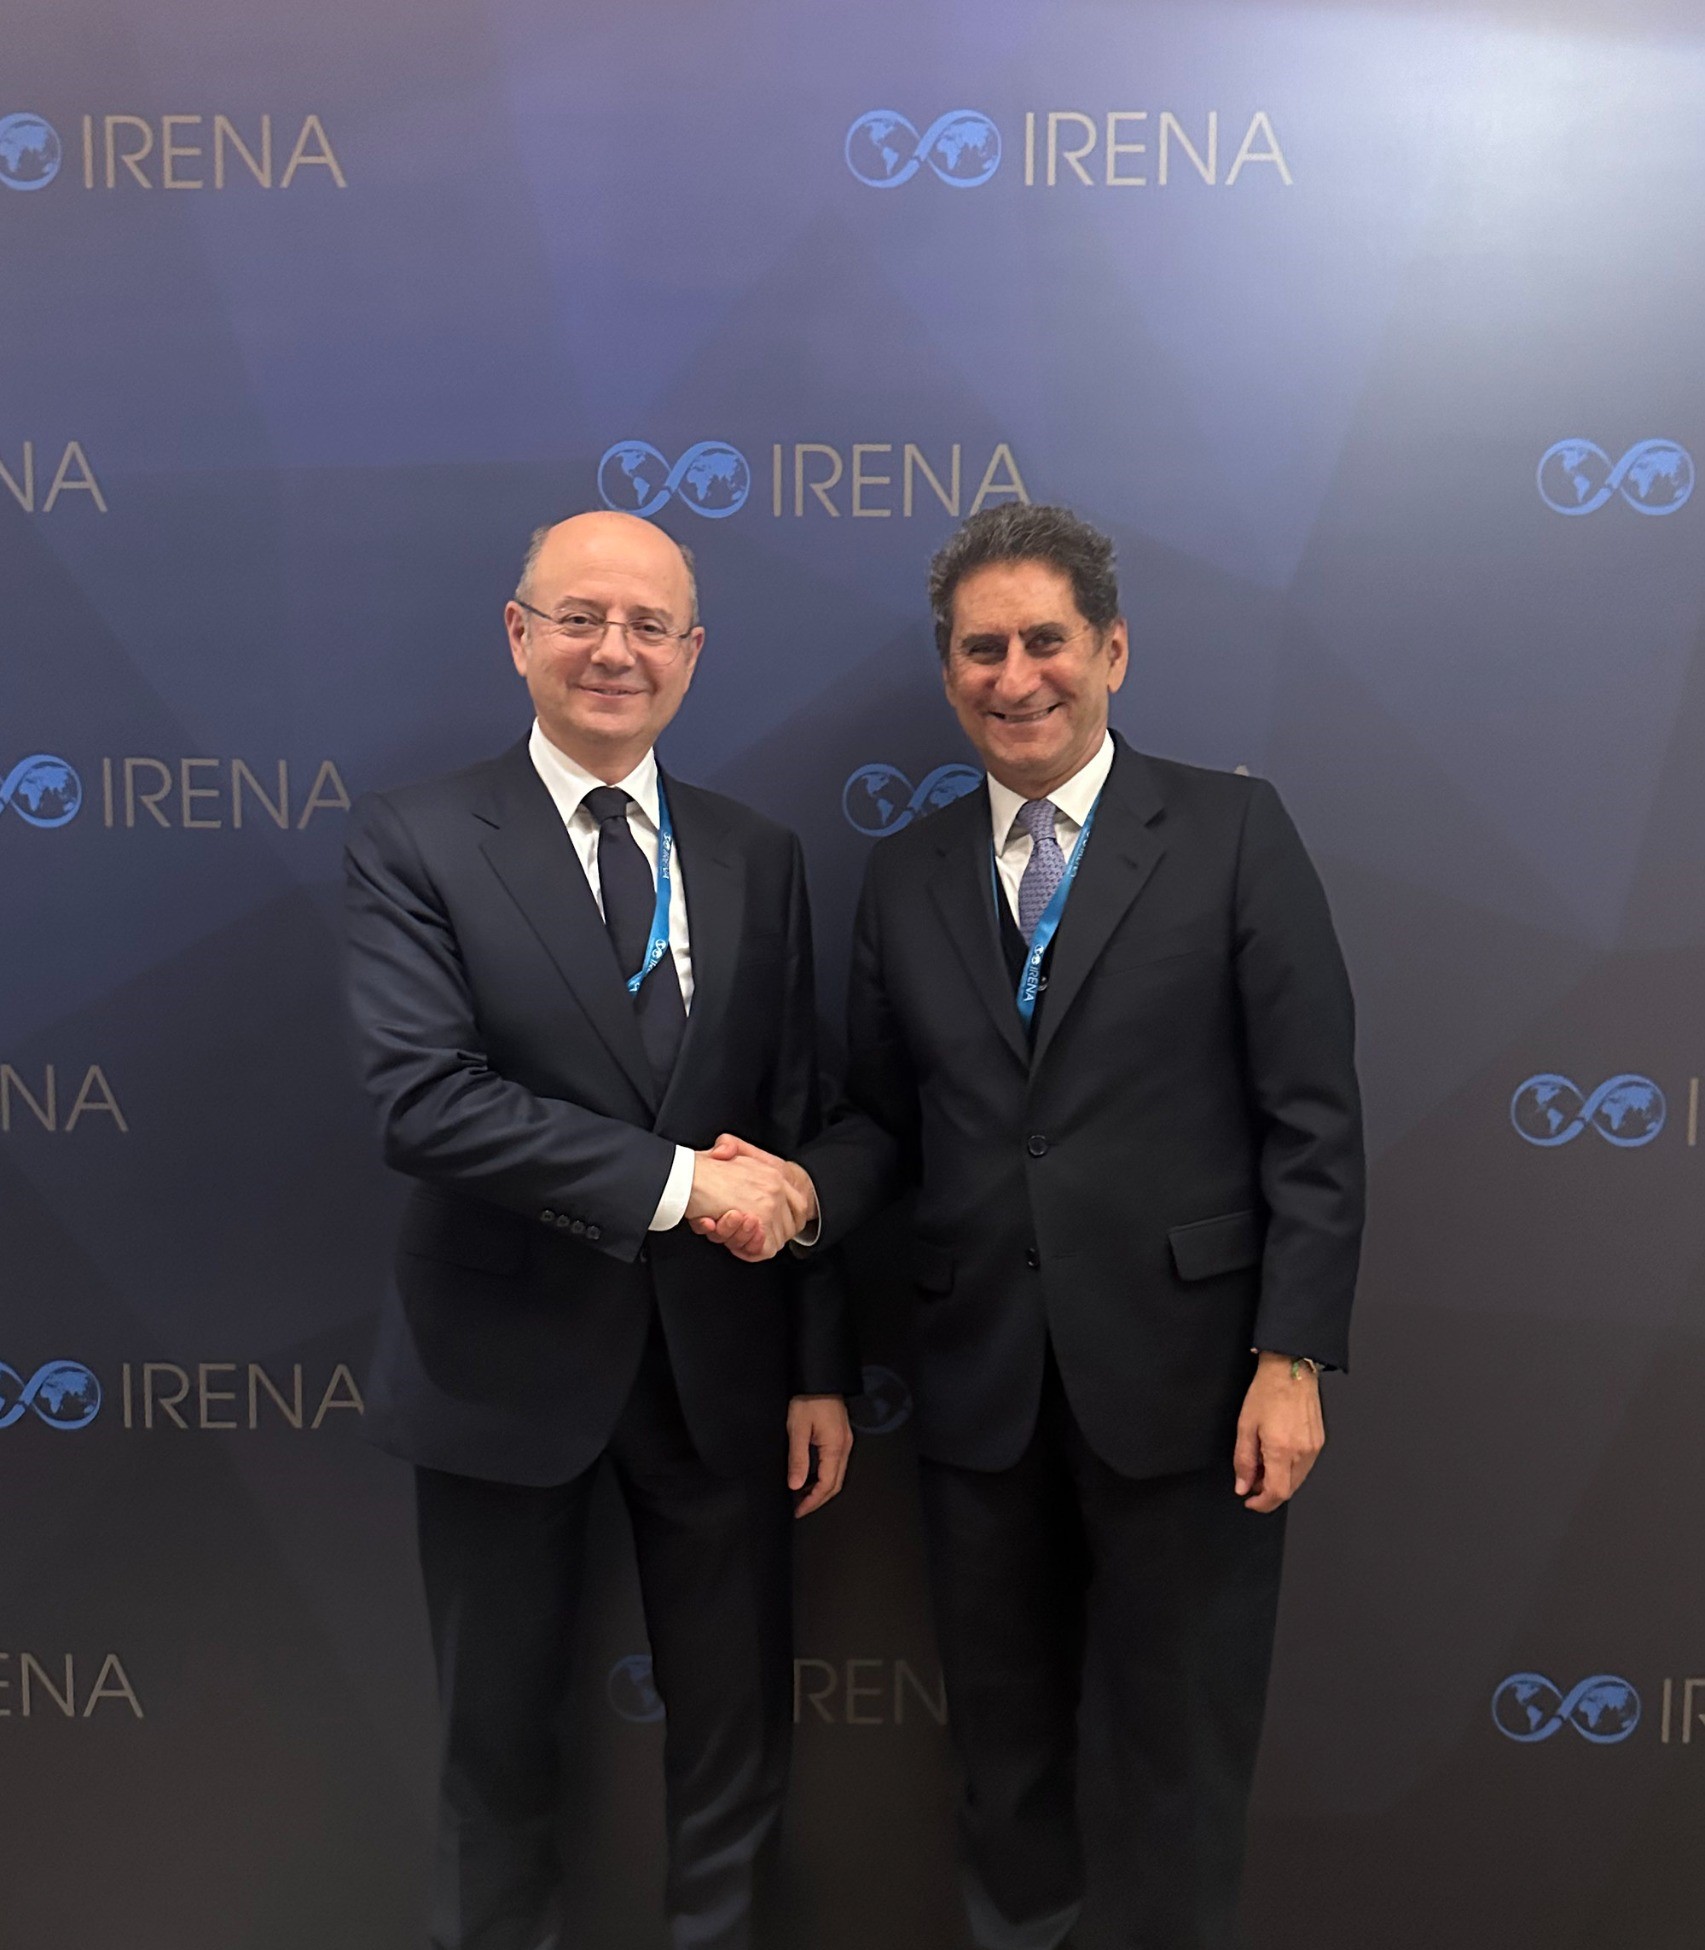 Energy Minister met with Director General of IRENA in Abu Dhabi